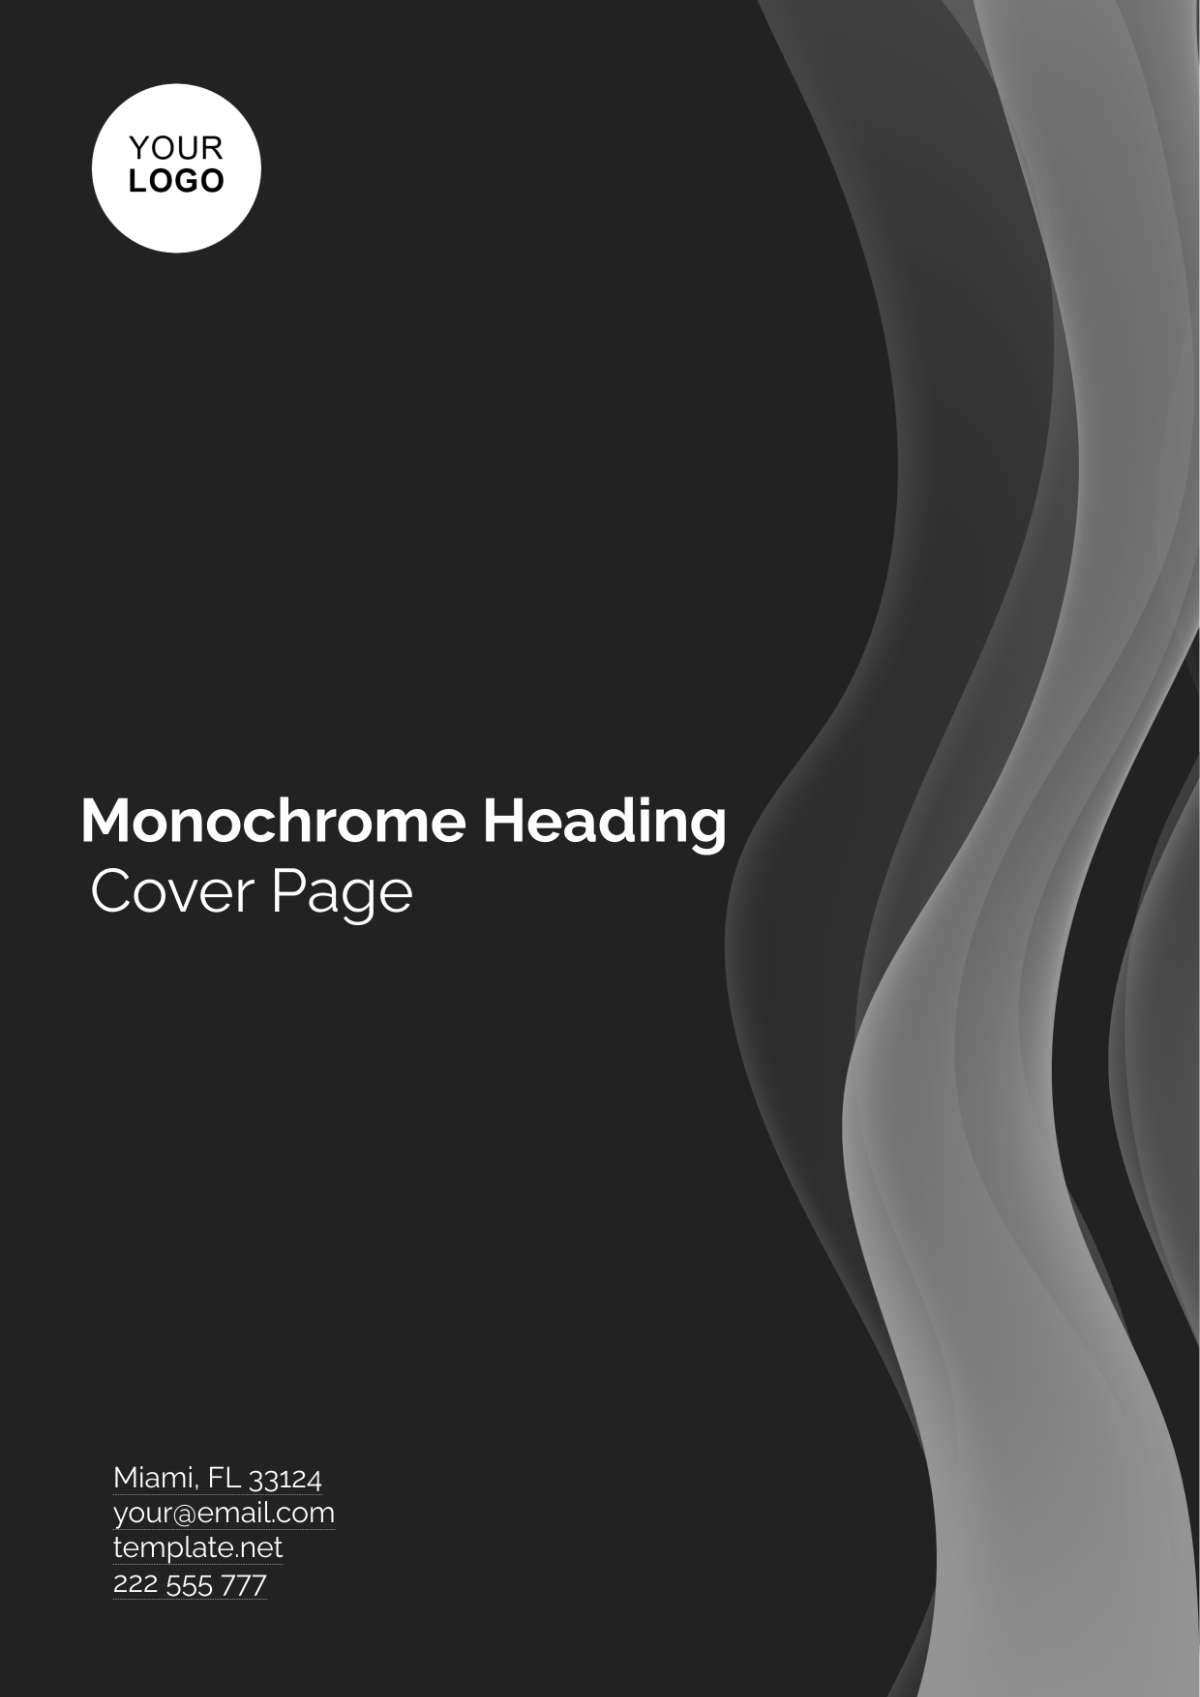 Monochrome Heading Cover Page Template